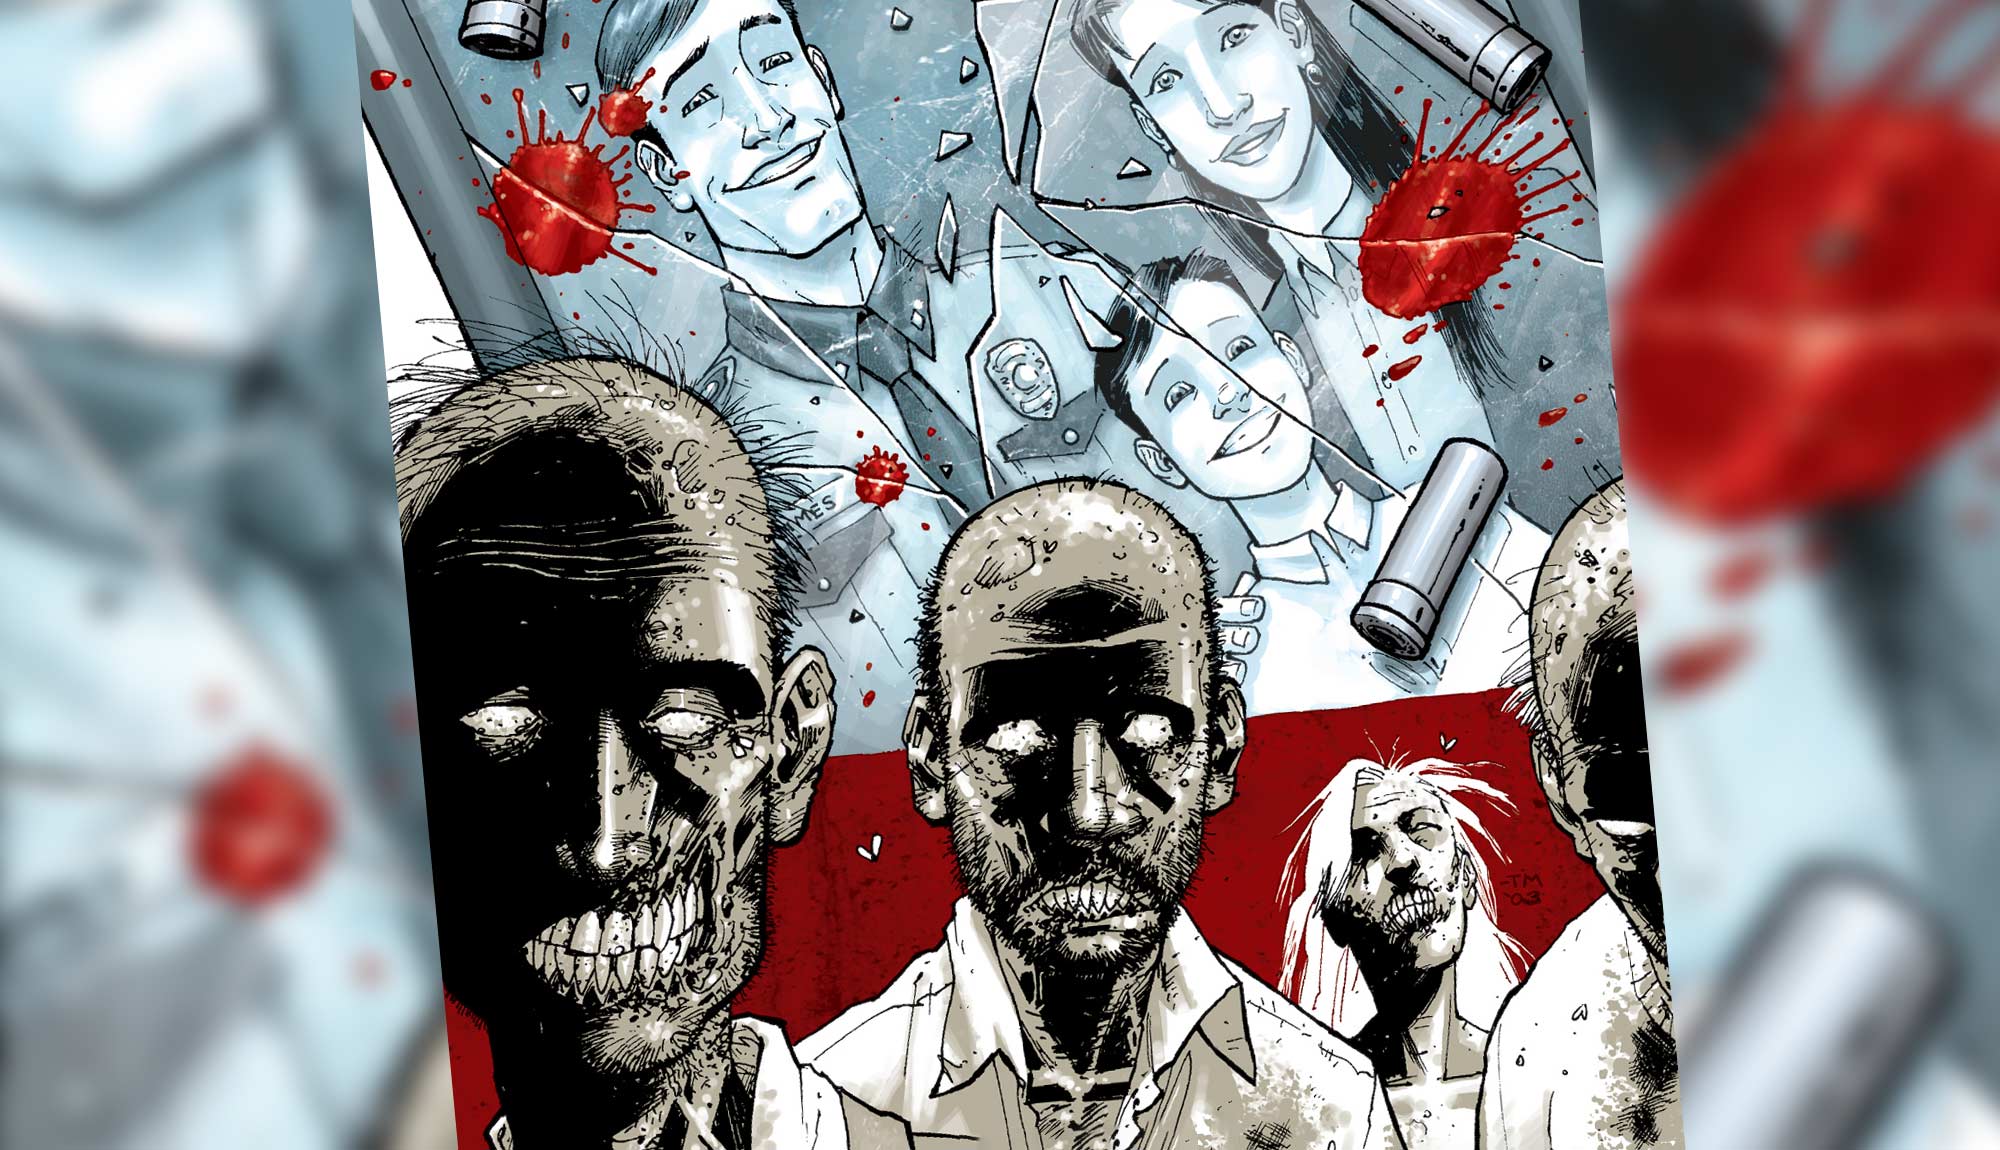 THE WALKING DEAD Dominates Decade’s Best Selling Graphic Novels